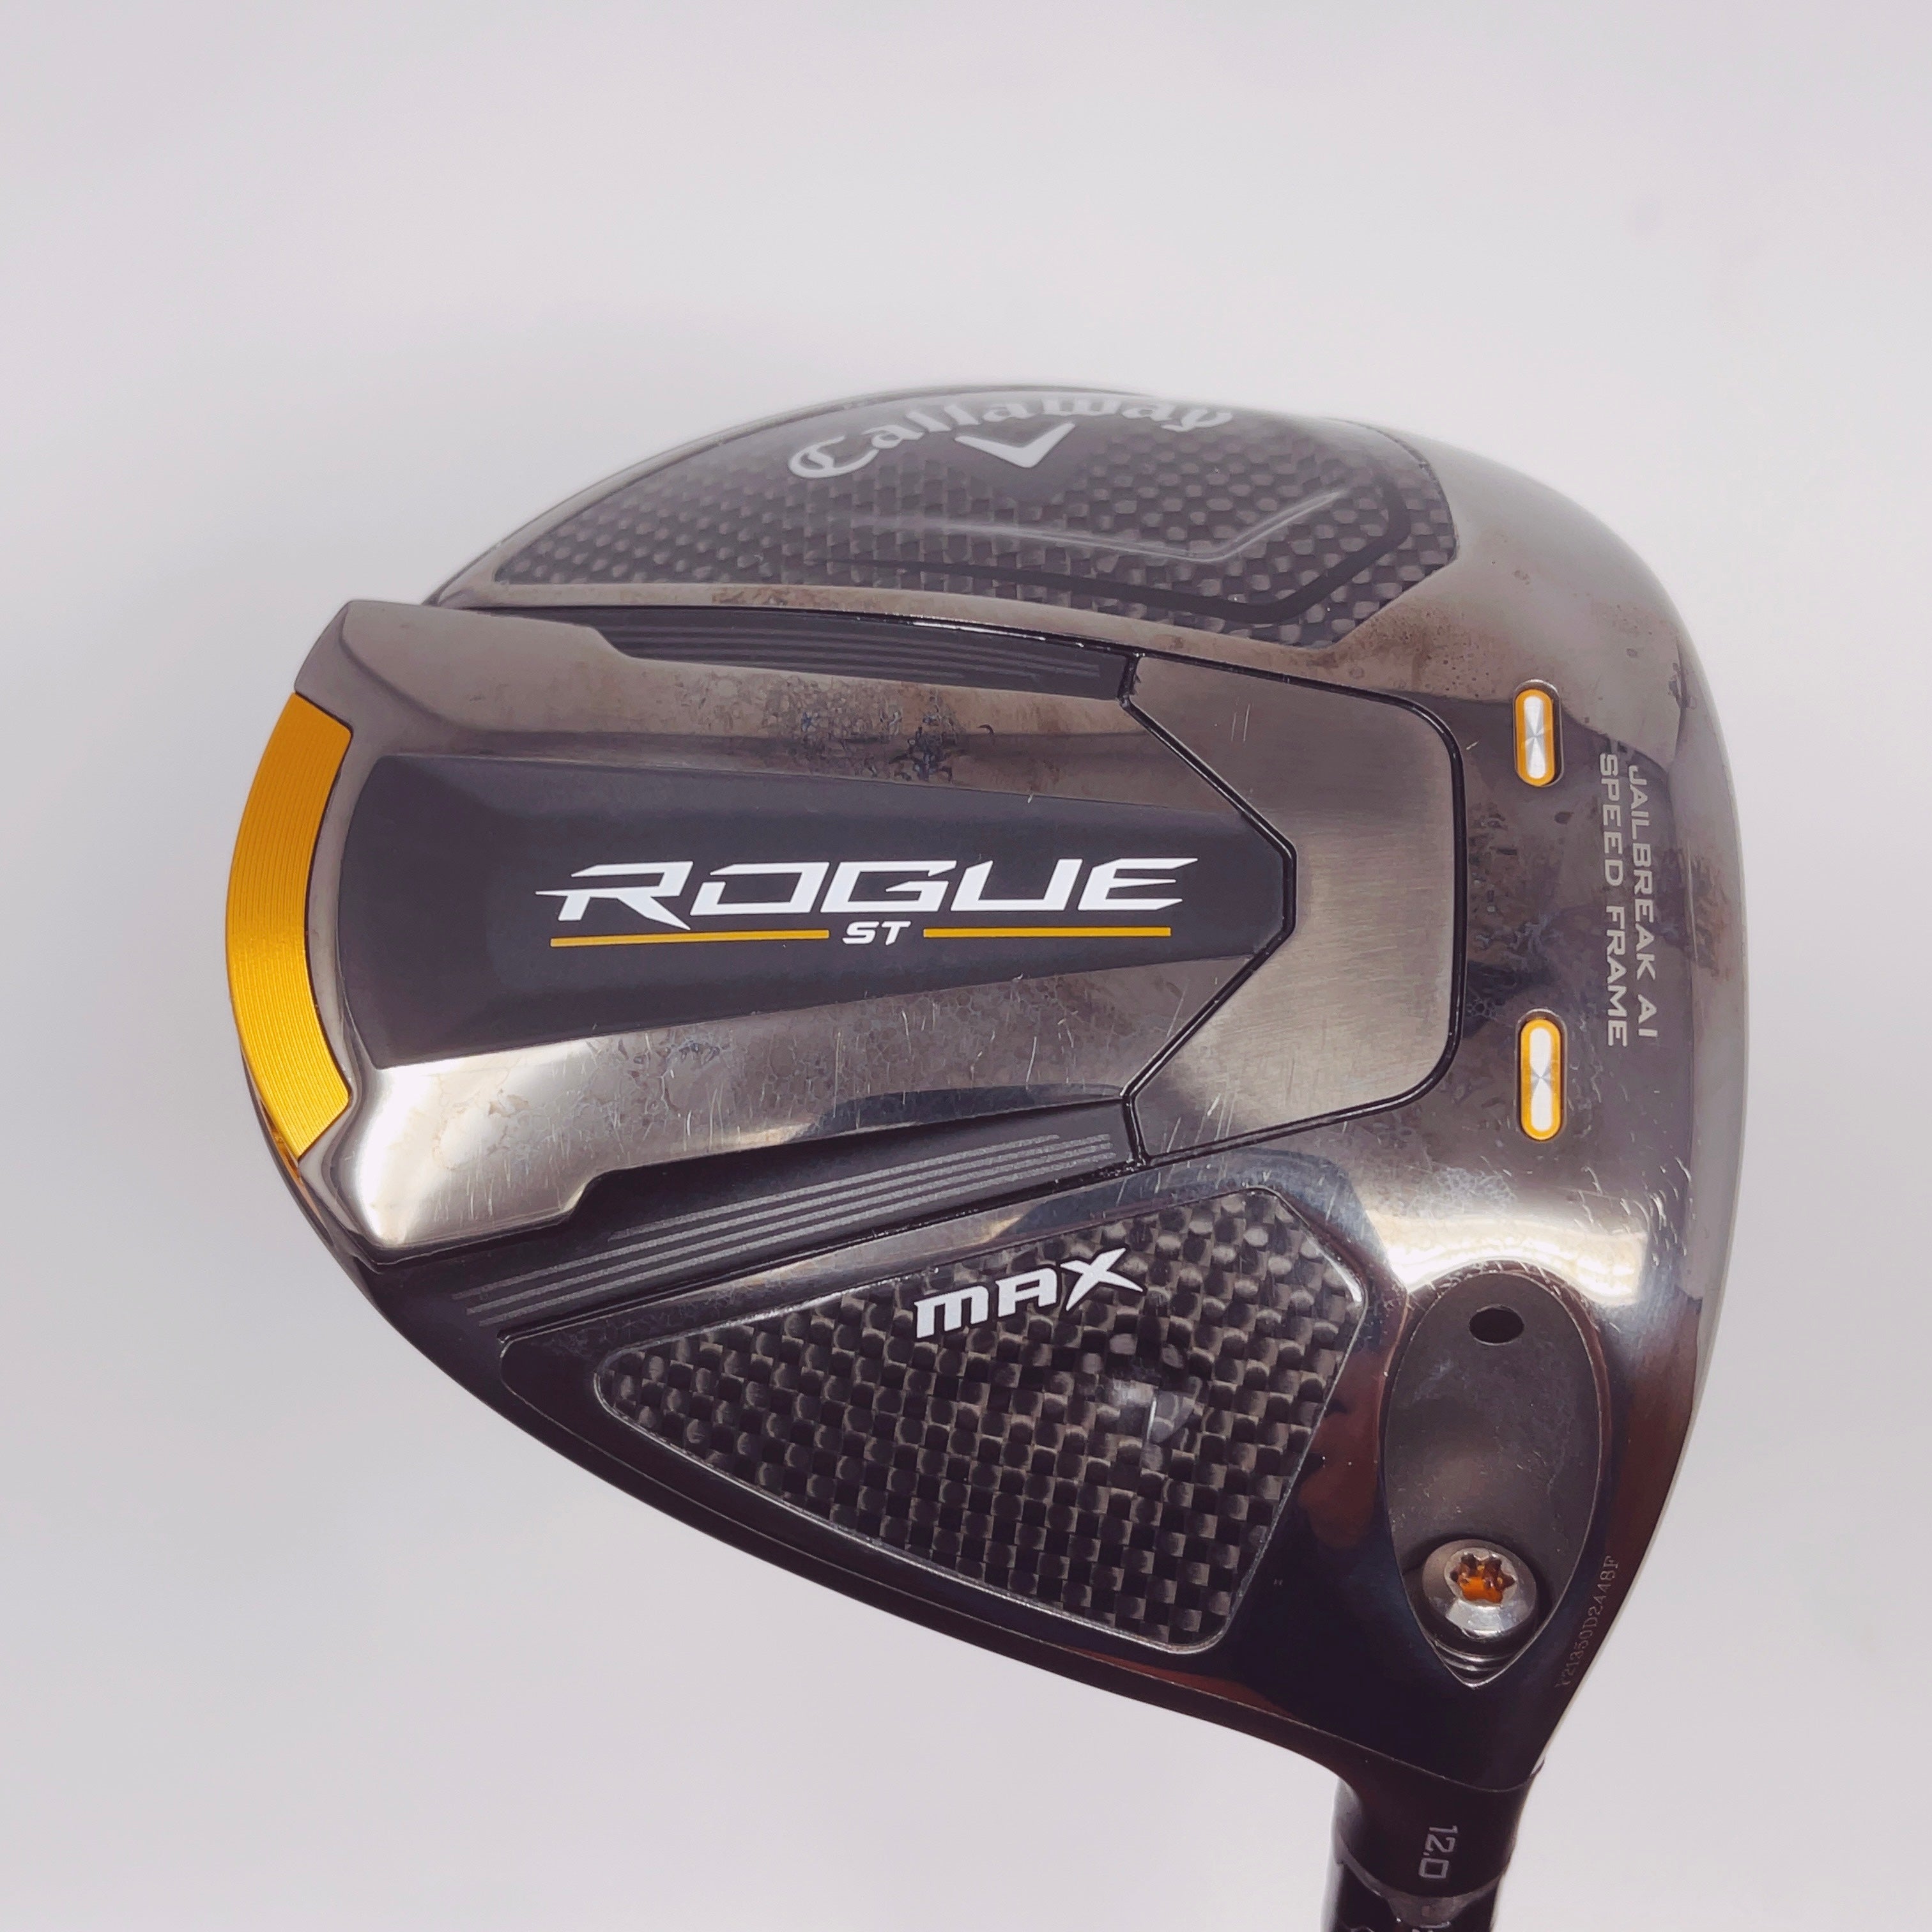 CALLAWAY ROGUE ST MAX DRIVER / 12 DEGREE / PROJECT X EVENFLOW 5.0 45G LITE SHAFT